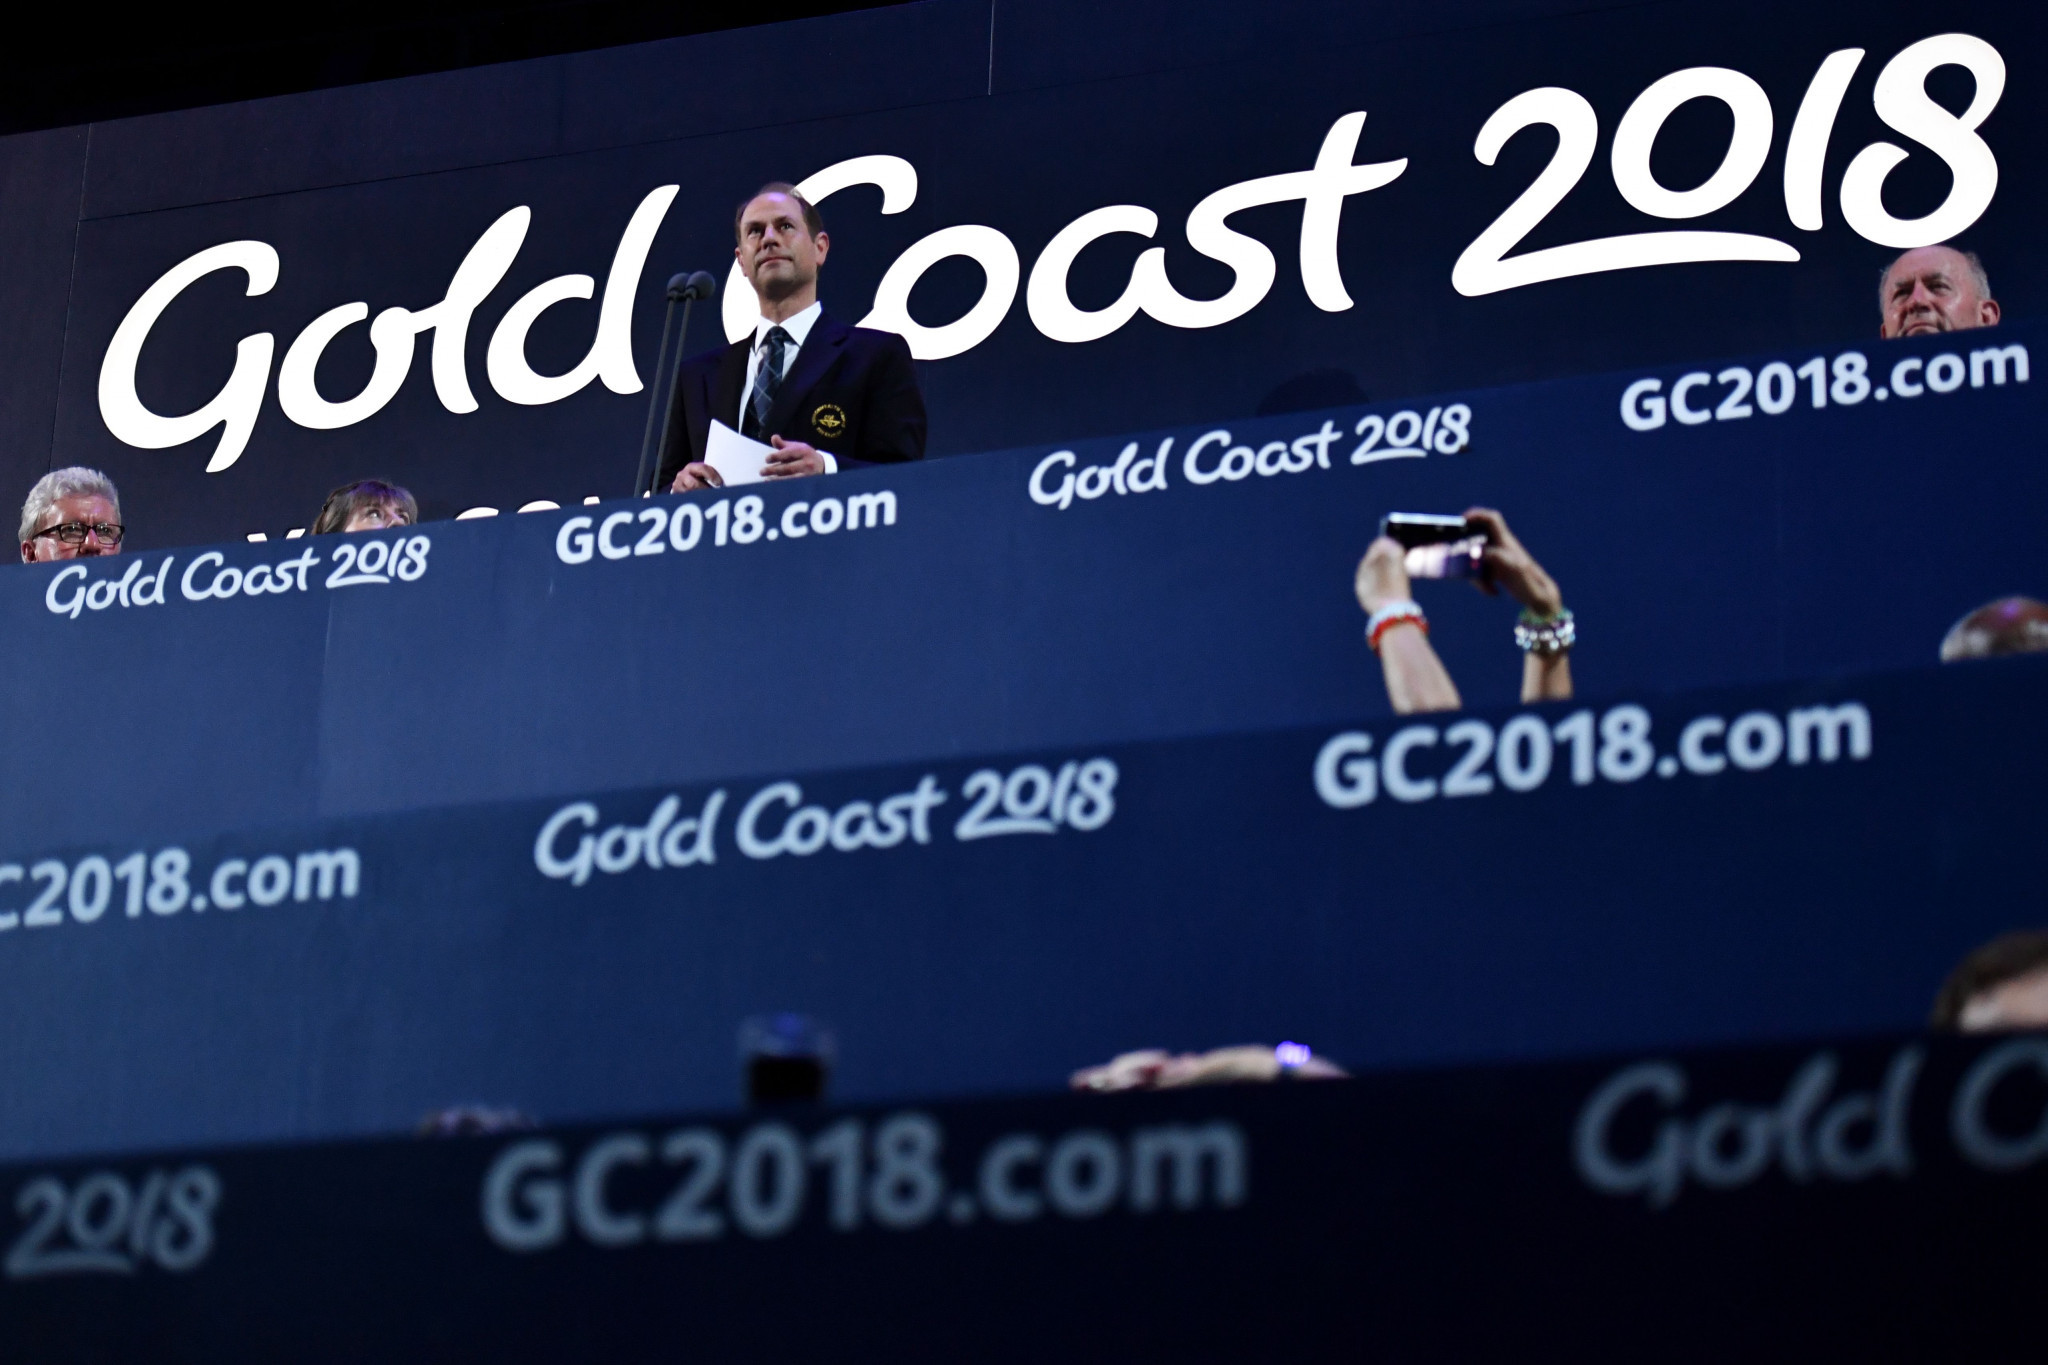 Gold Coast 2018 miss own revenue target, report says